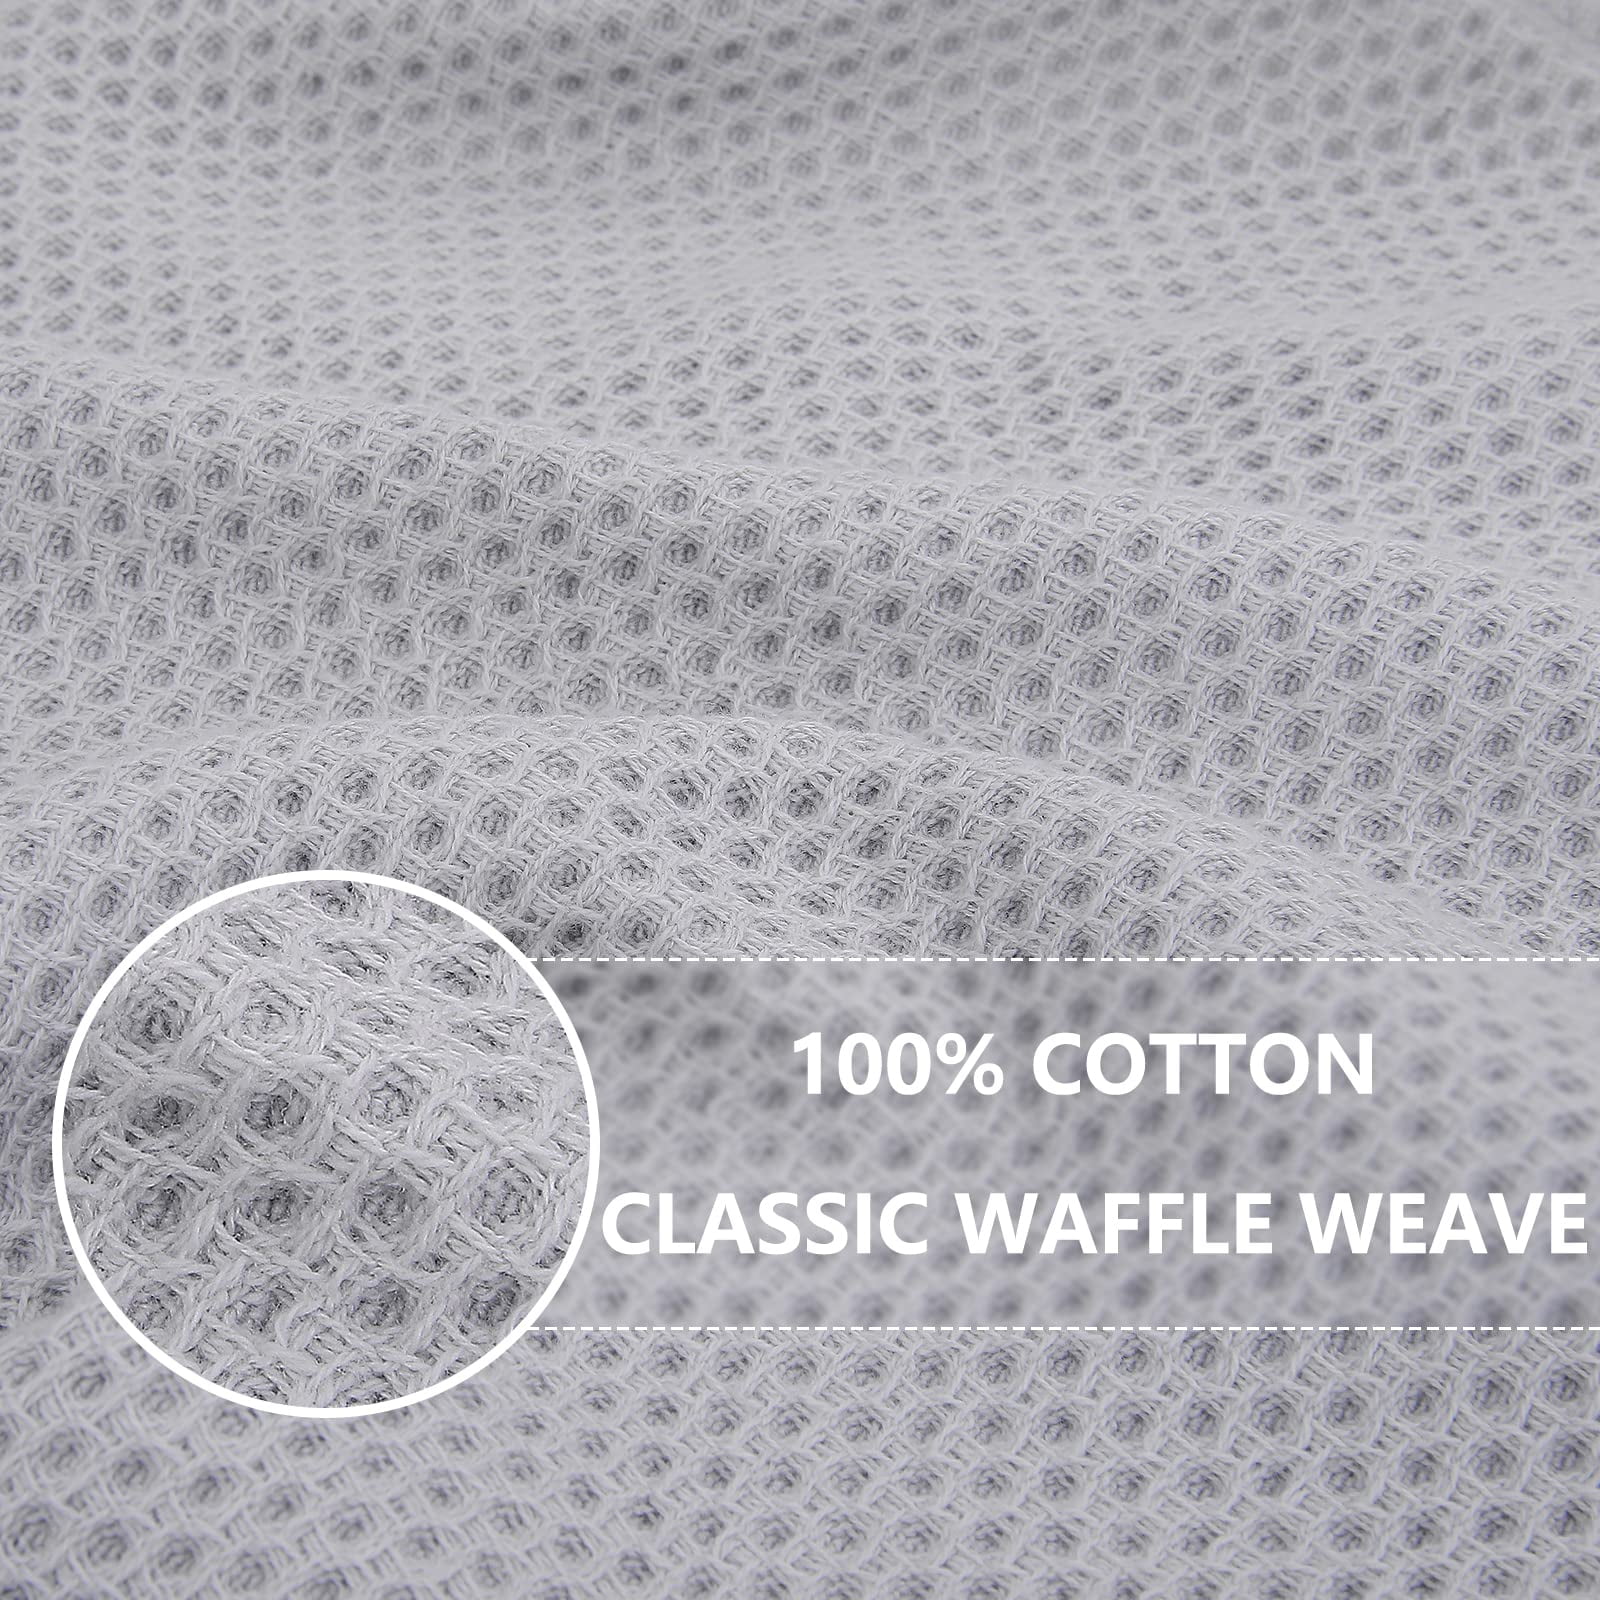 Homaxy 100% Cotton Waffle Weave Kitchen Dish Cloths, Ultra Soft Absorbent  Quick Drying Dish Towels, 12x12 Inches, 6-Pack, Navy Blue